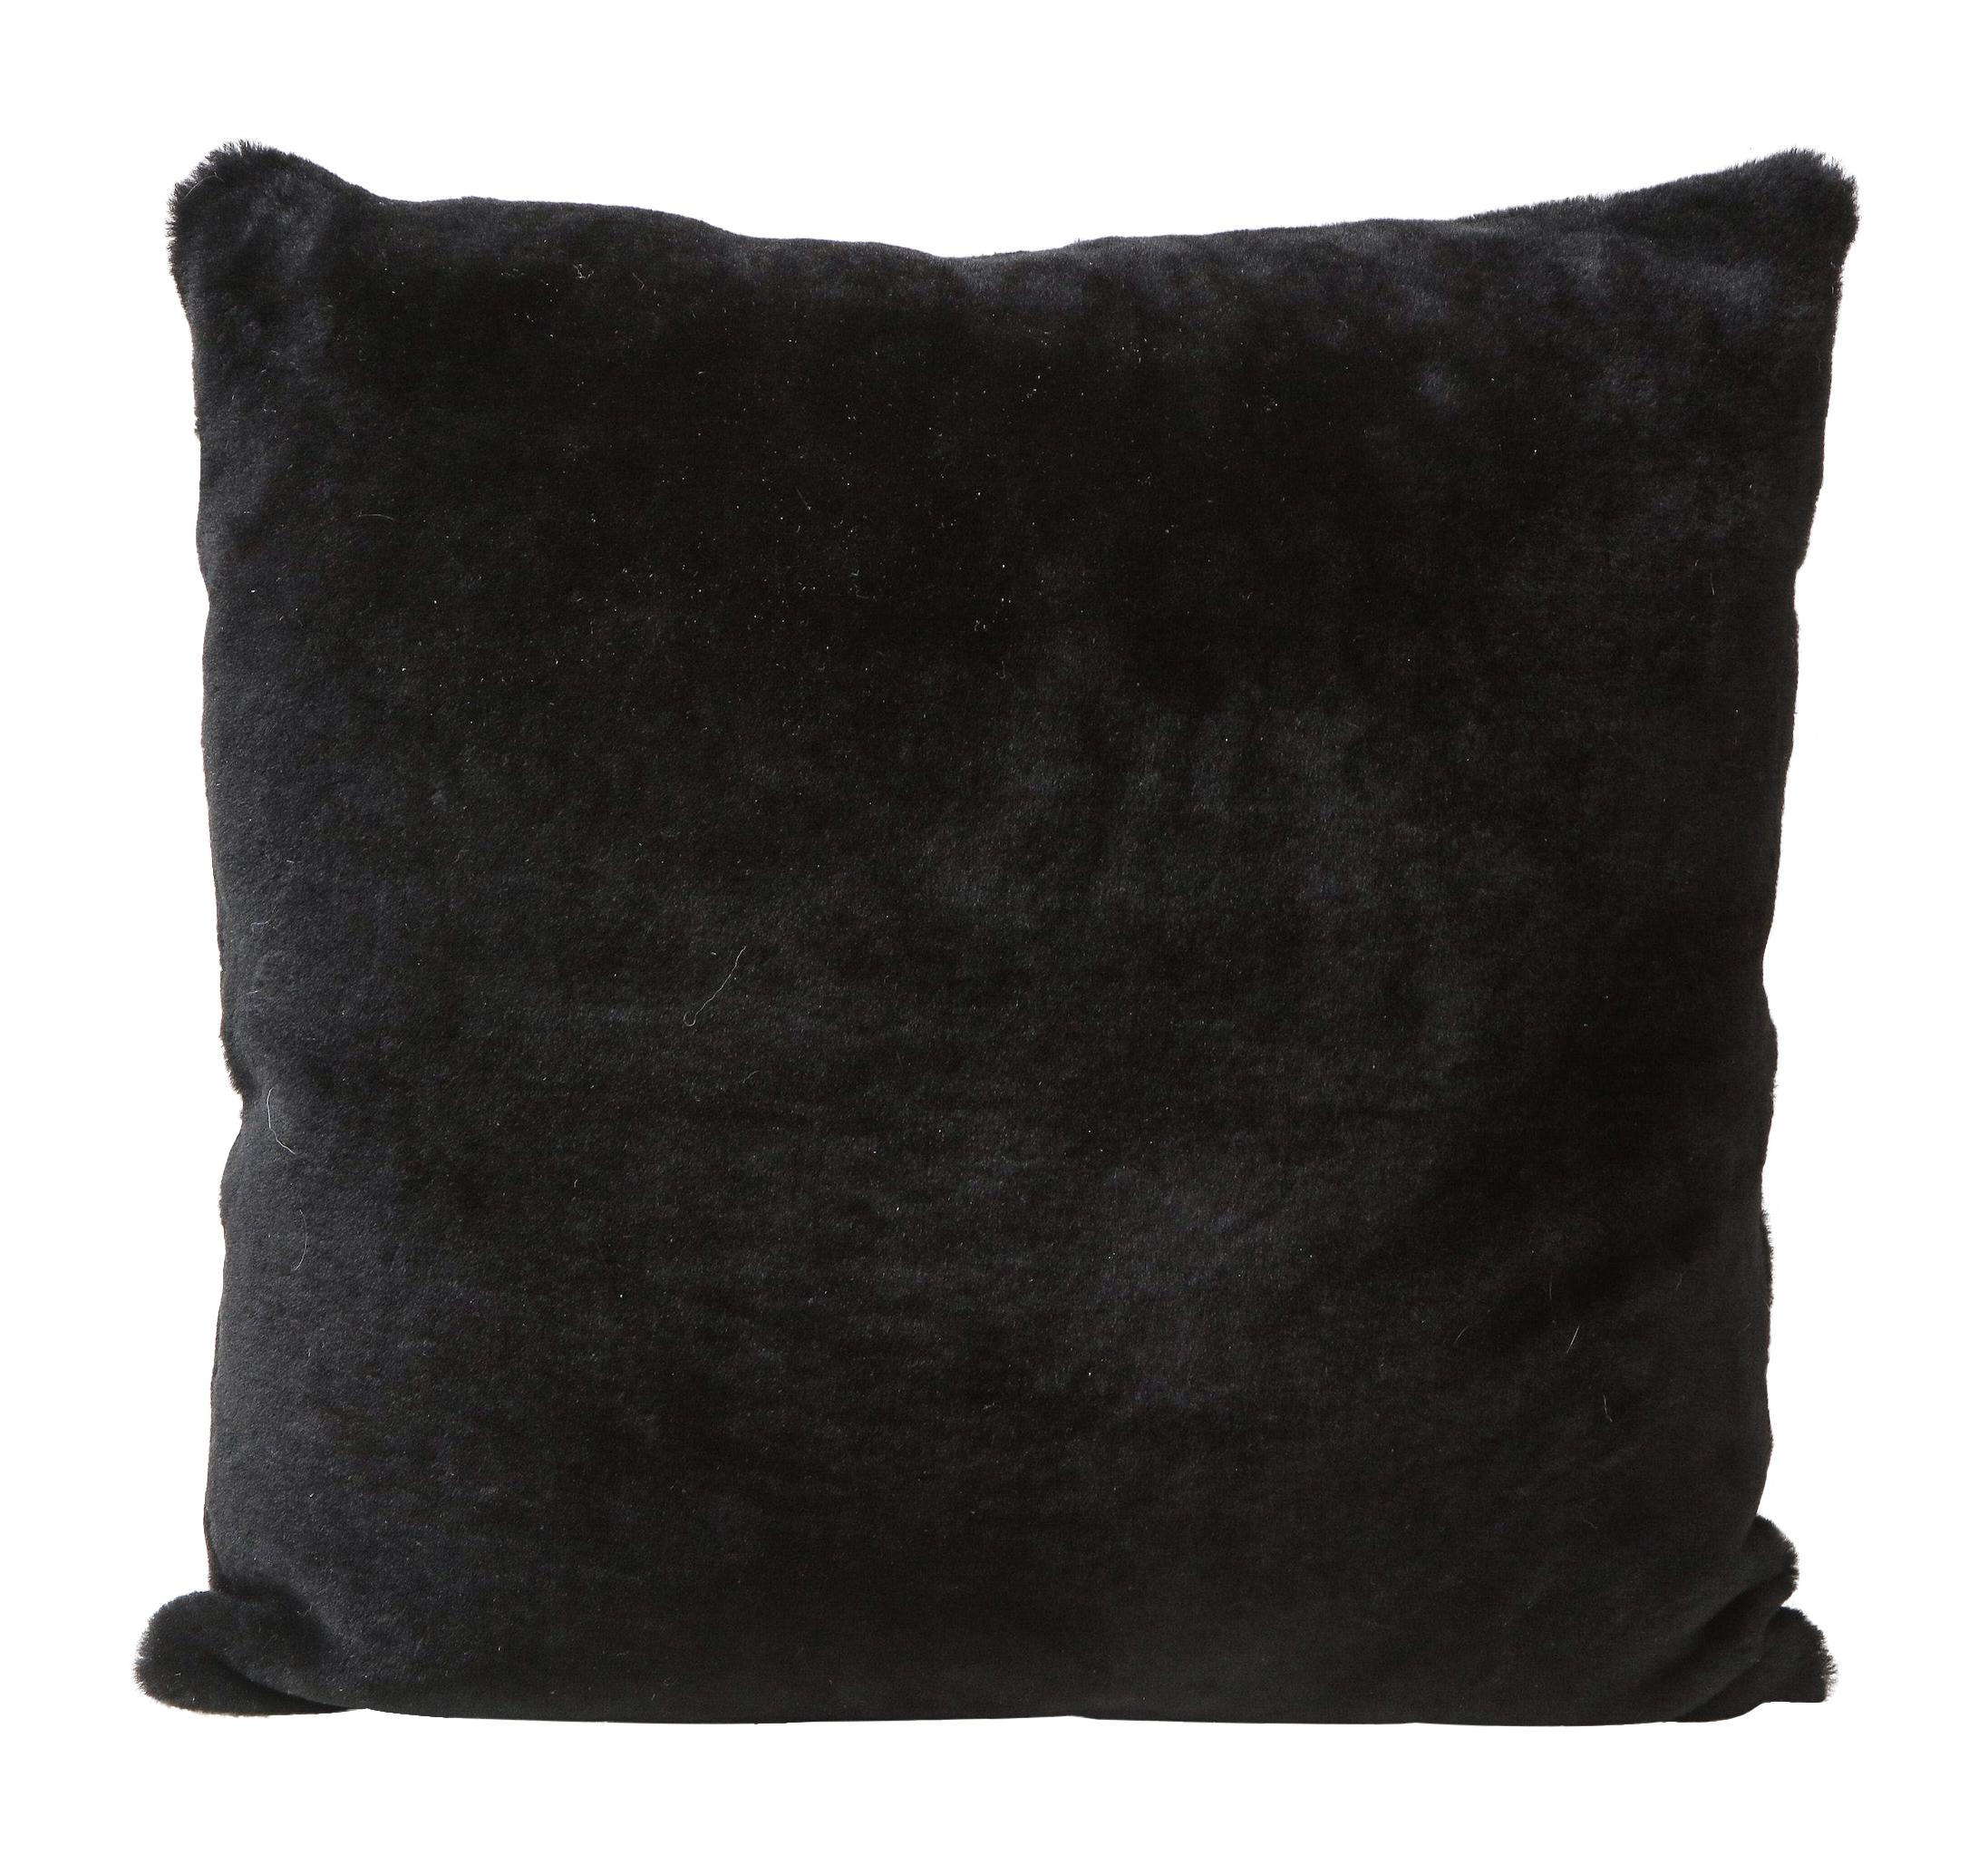 Custom Double Sided Merino Shearling Pillow in Black Color